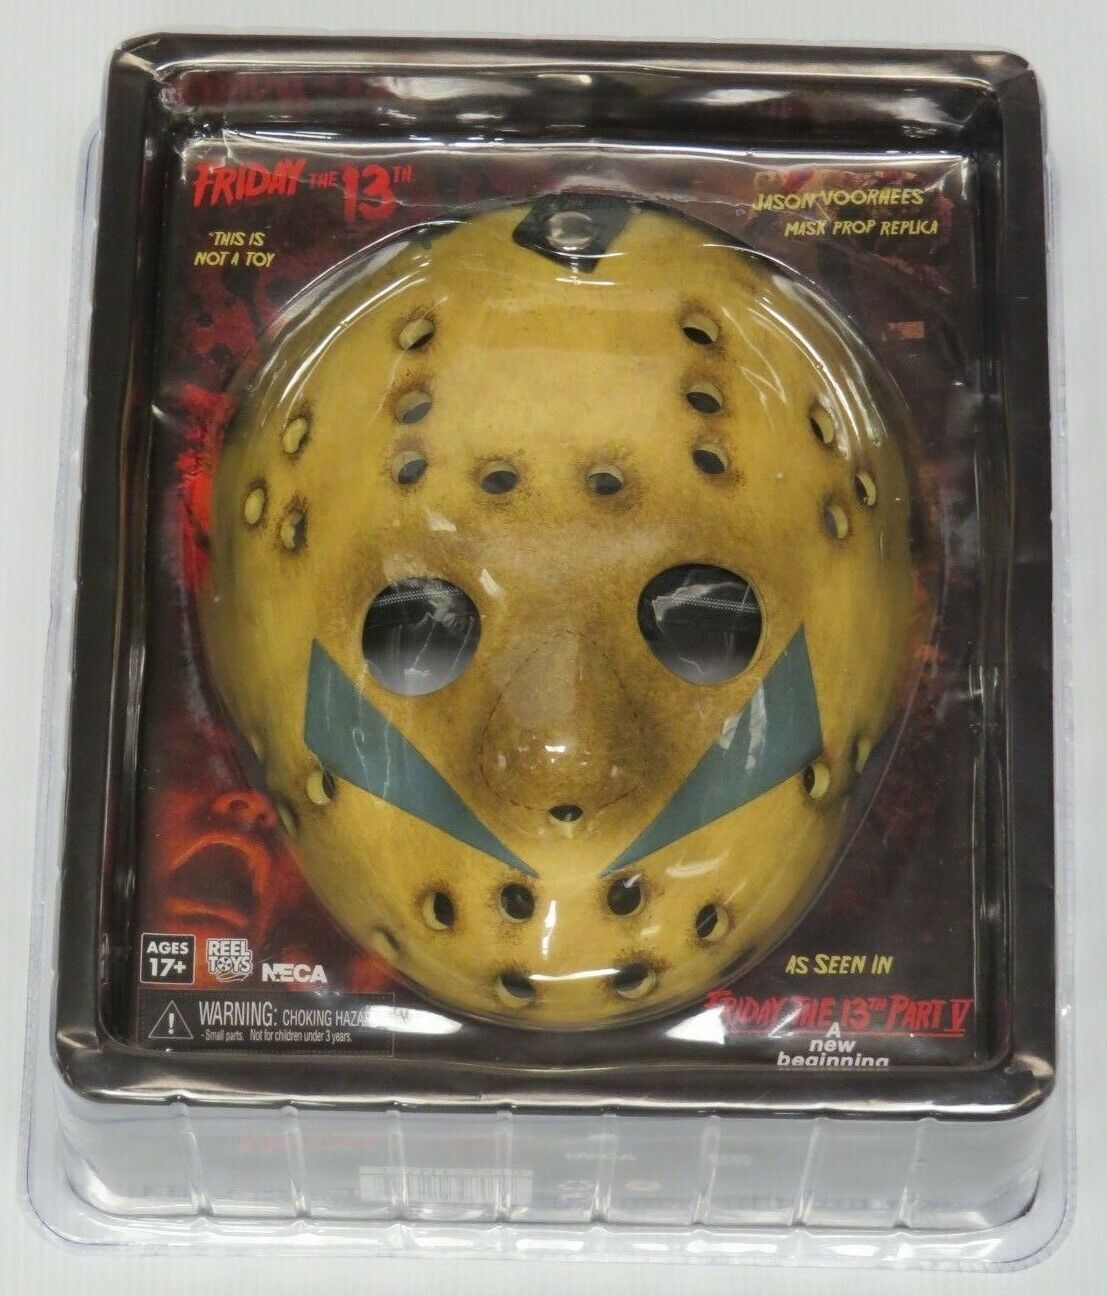 JASON VORHEES Friday the 13th Part 5 NECA Prop Replica Mask 